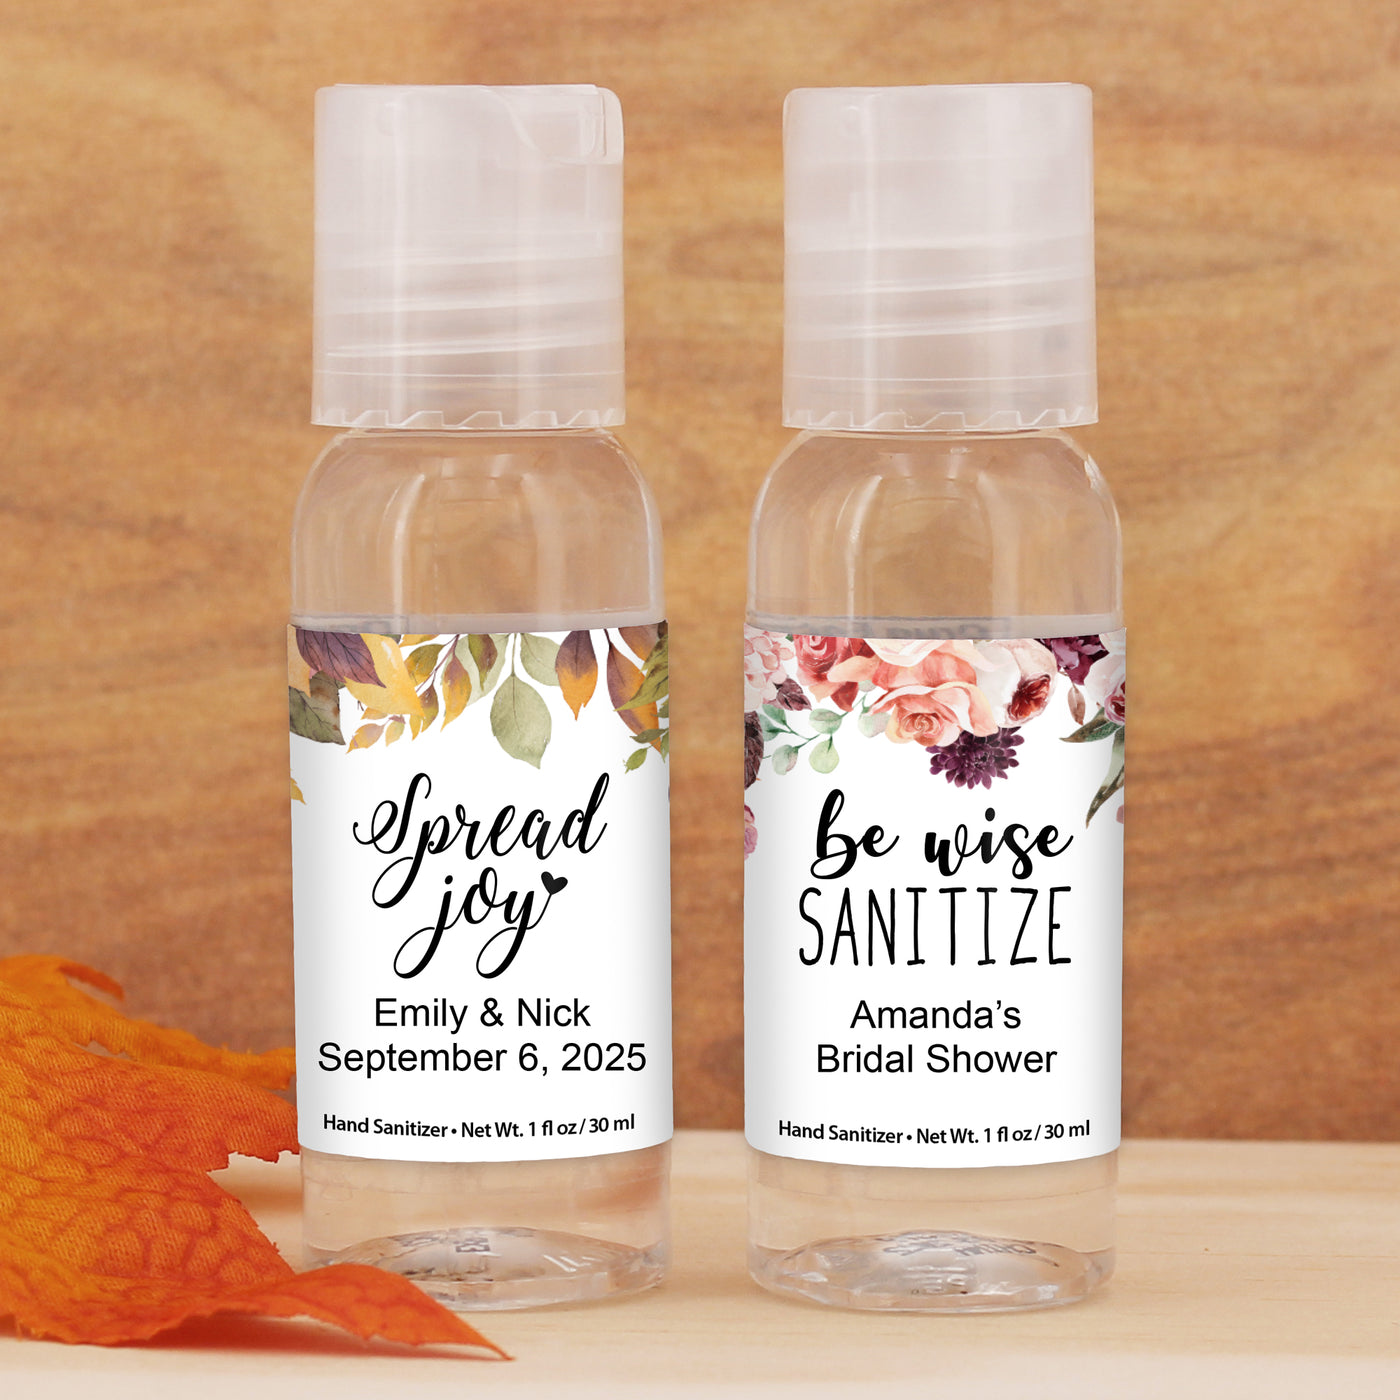 Floral & Botanicals Personalized Hand Sanitizers